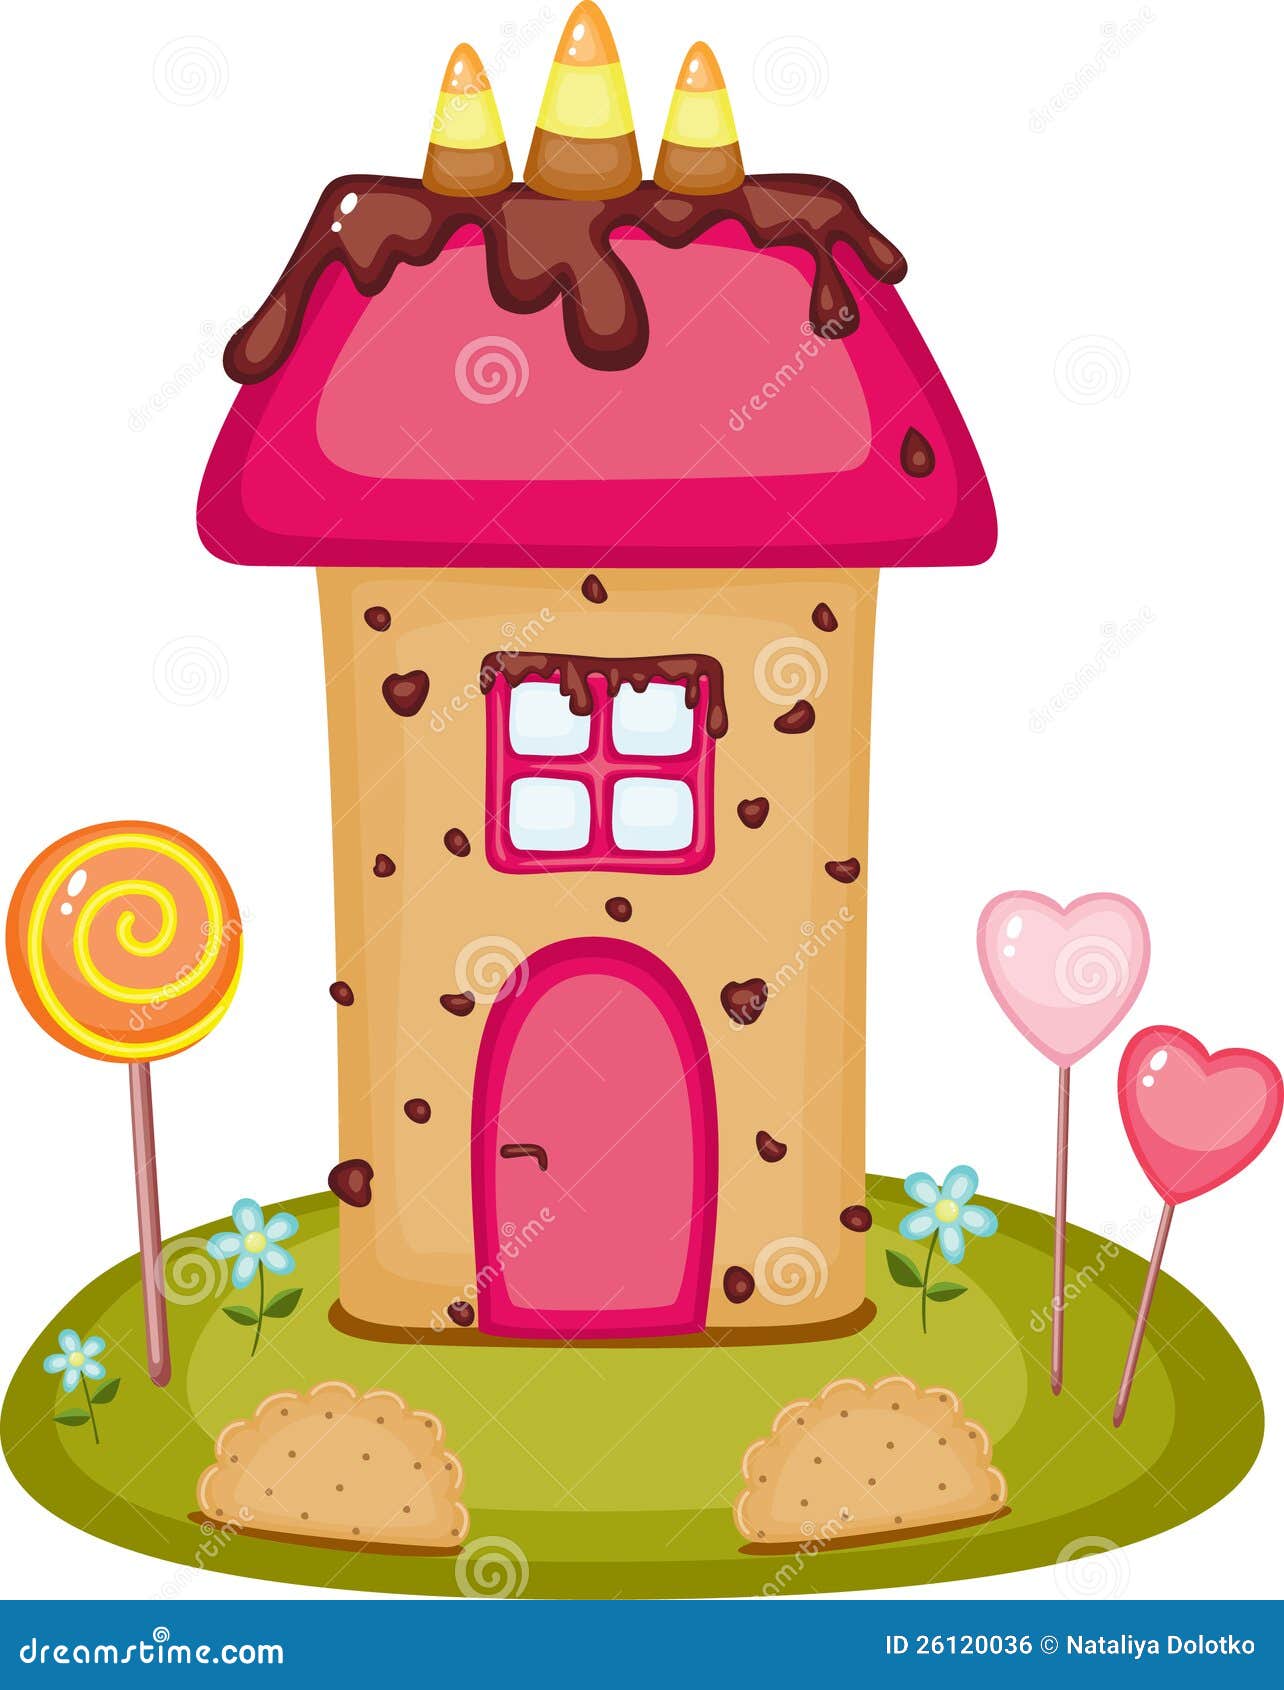 candy house clipart - photo #17